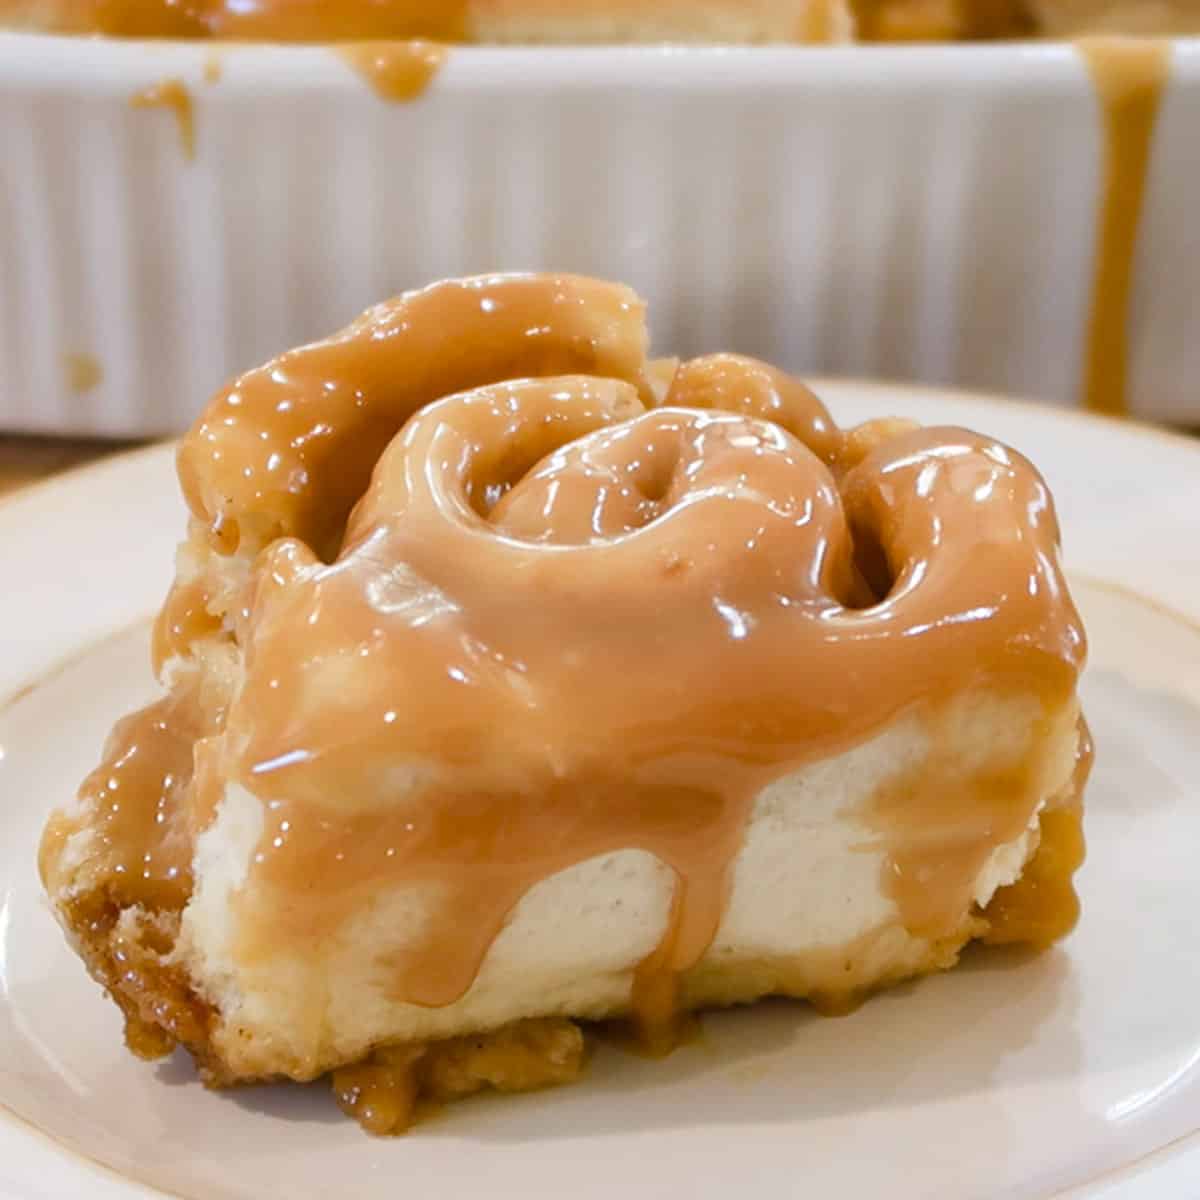 caramel Cinnamon Rolls with caramel Topping.